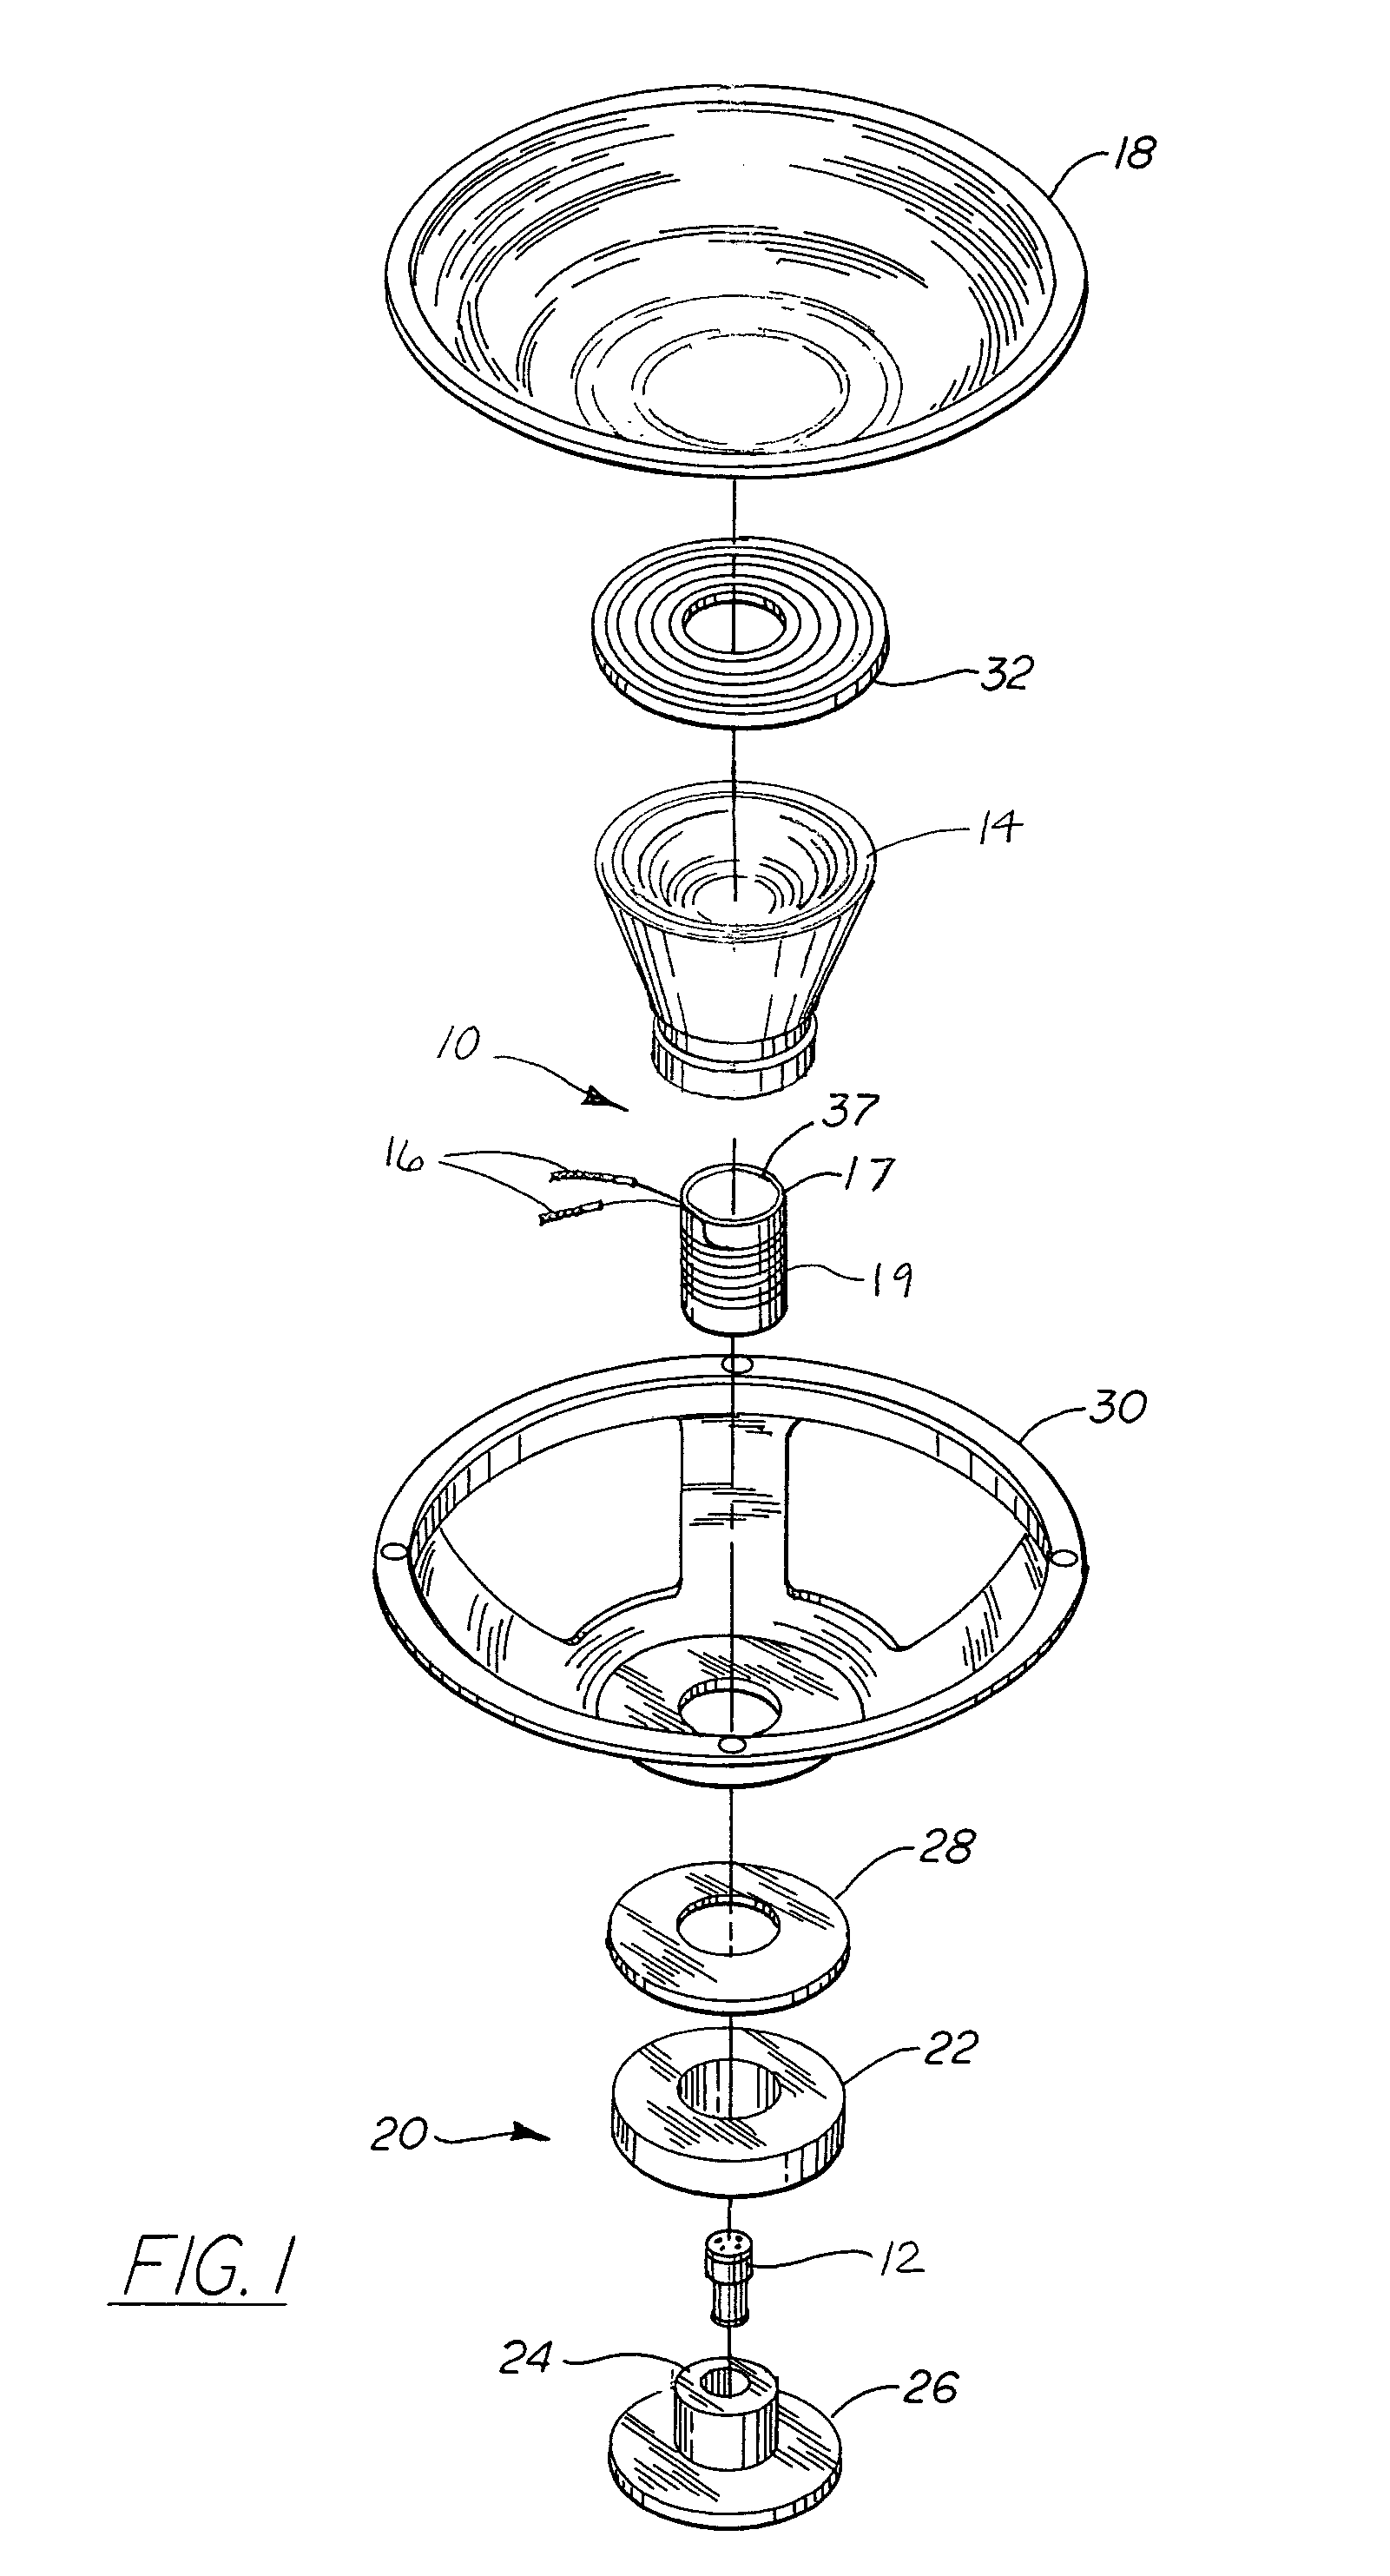 Loudspeaker having an inner lead wire system and related method of protecting the lead wires